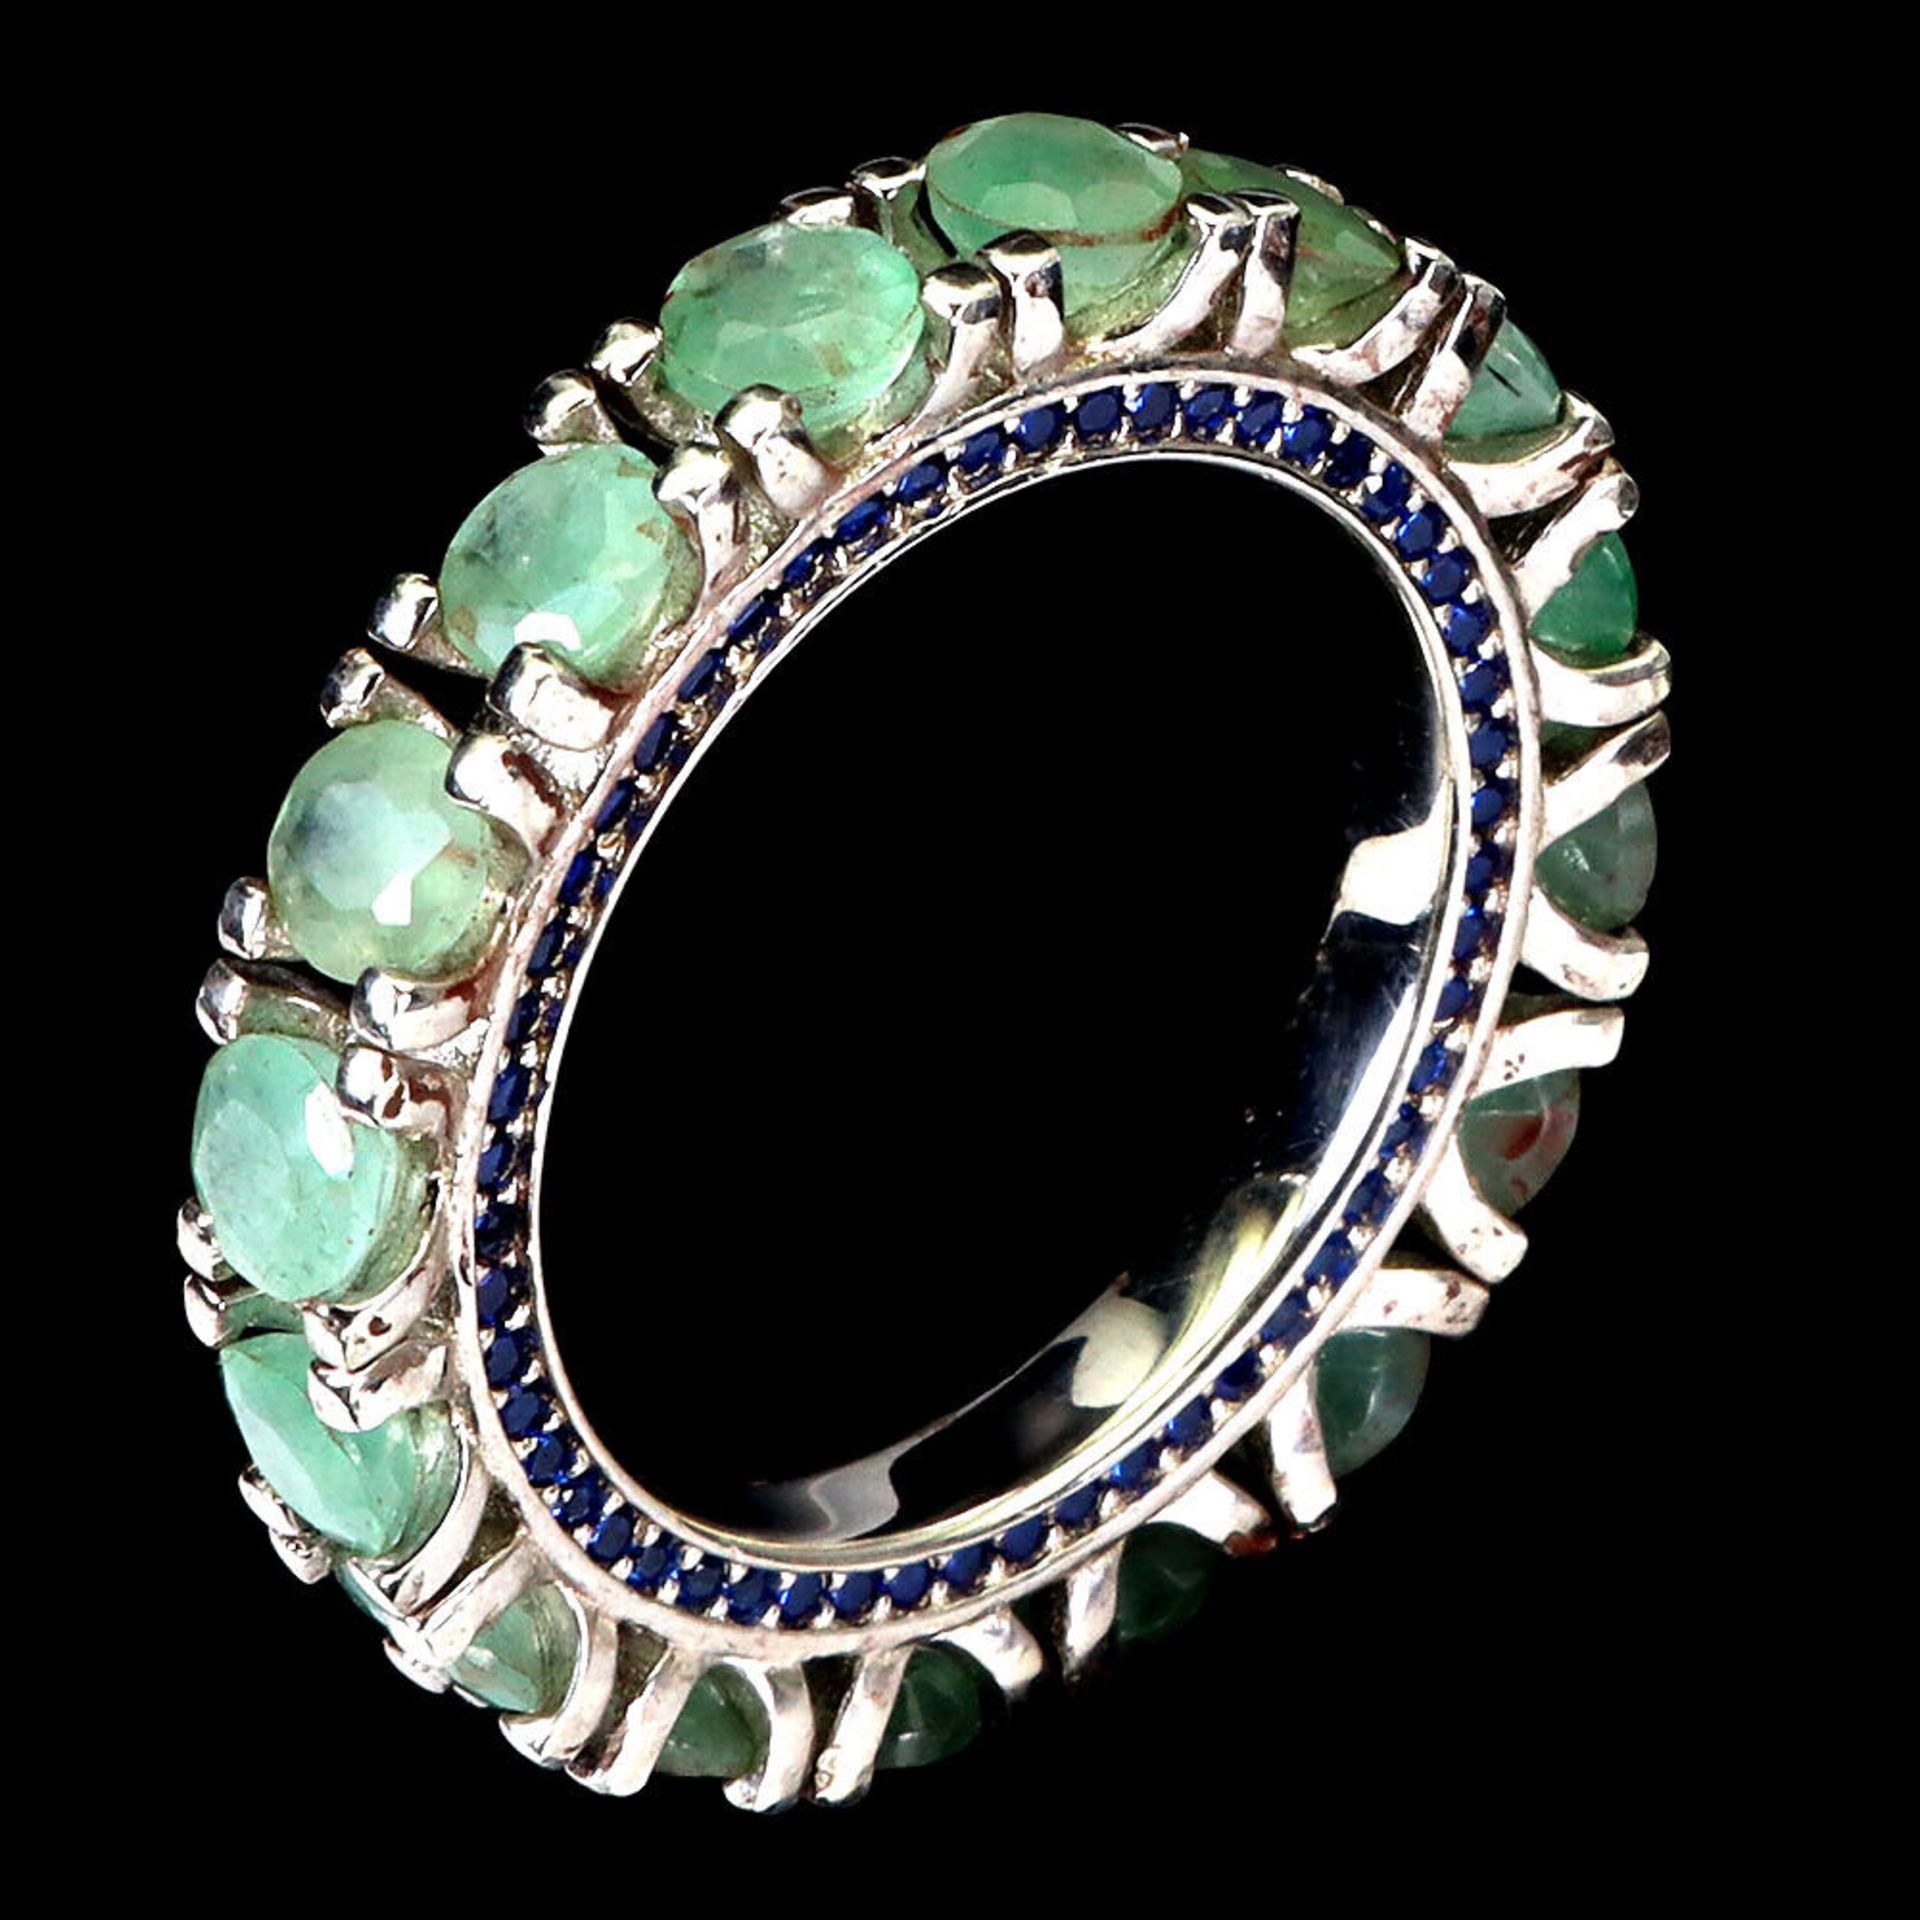 A 925 silver full eternity ring set with emeralds and sapphire set shank, ring size O. - Image 2 of 3